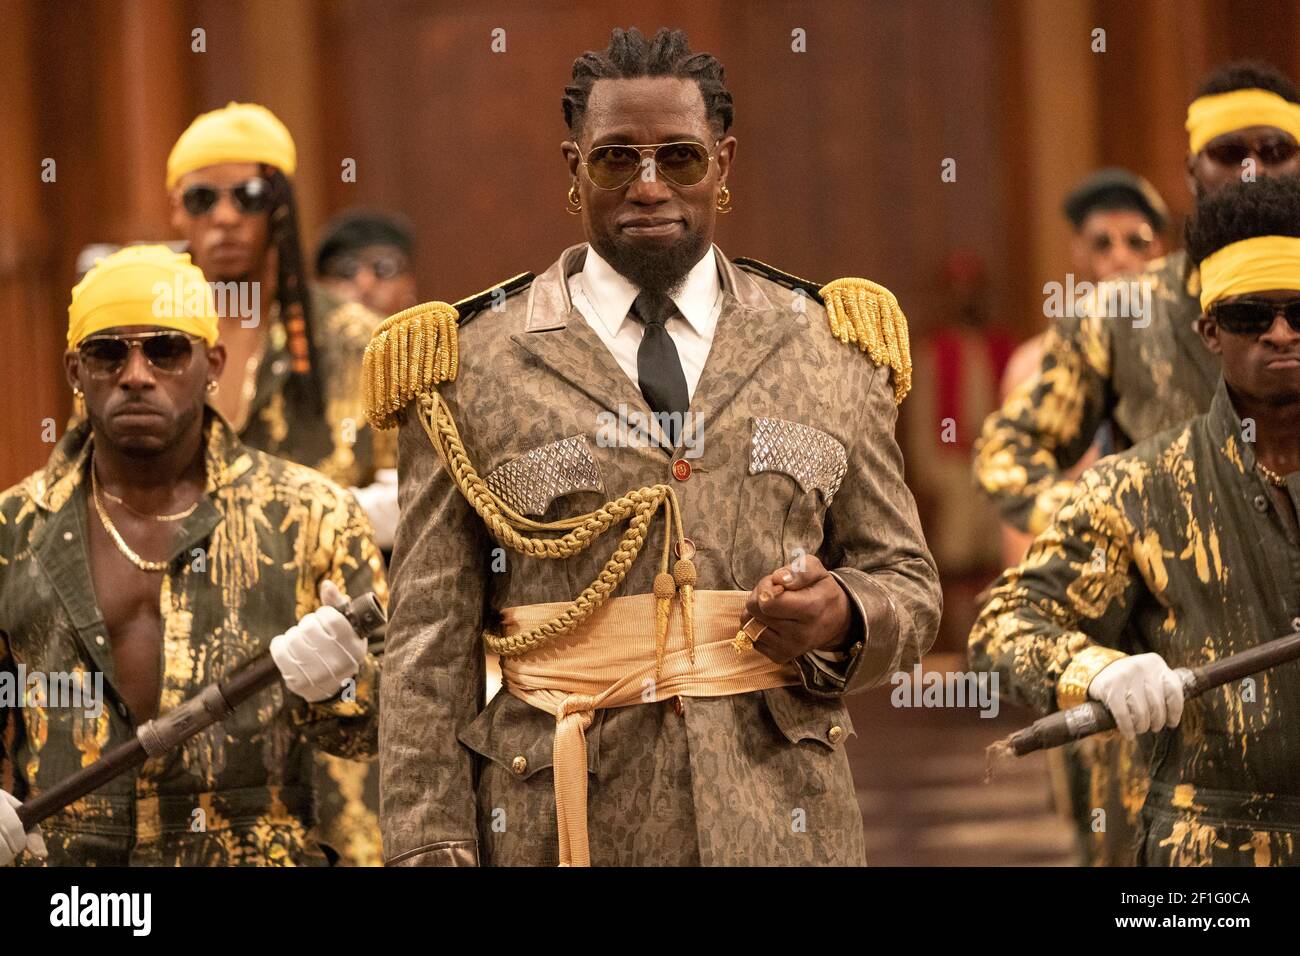 Coming 2 America (2021) directed by Craig Brewer and starring Wesley Snipes as General Izzi in this sequel to the 1988 Coming to America. Stock Photo